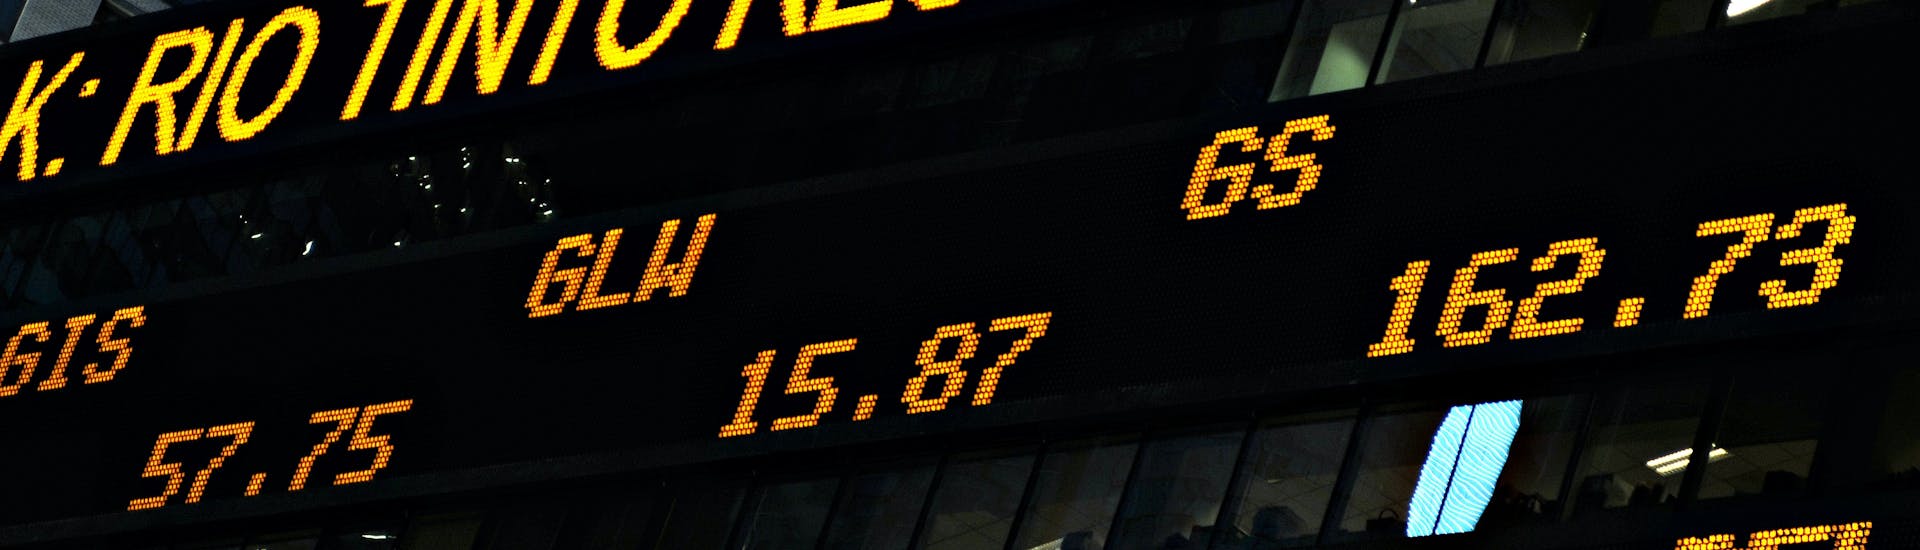 a stock market electronic board with tickers and prices